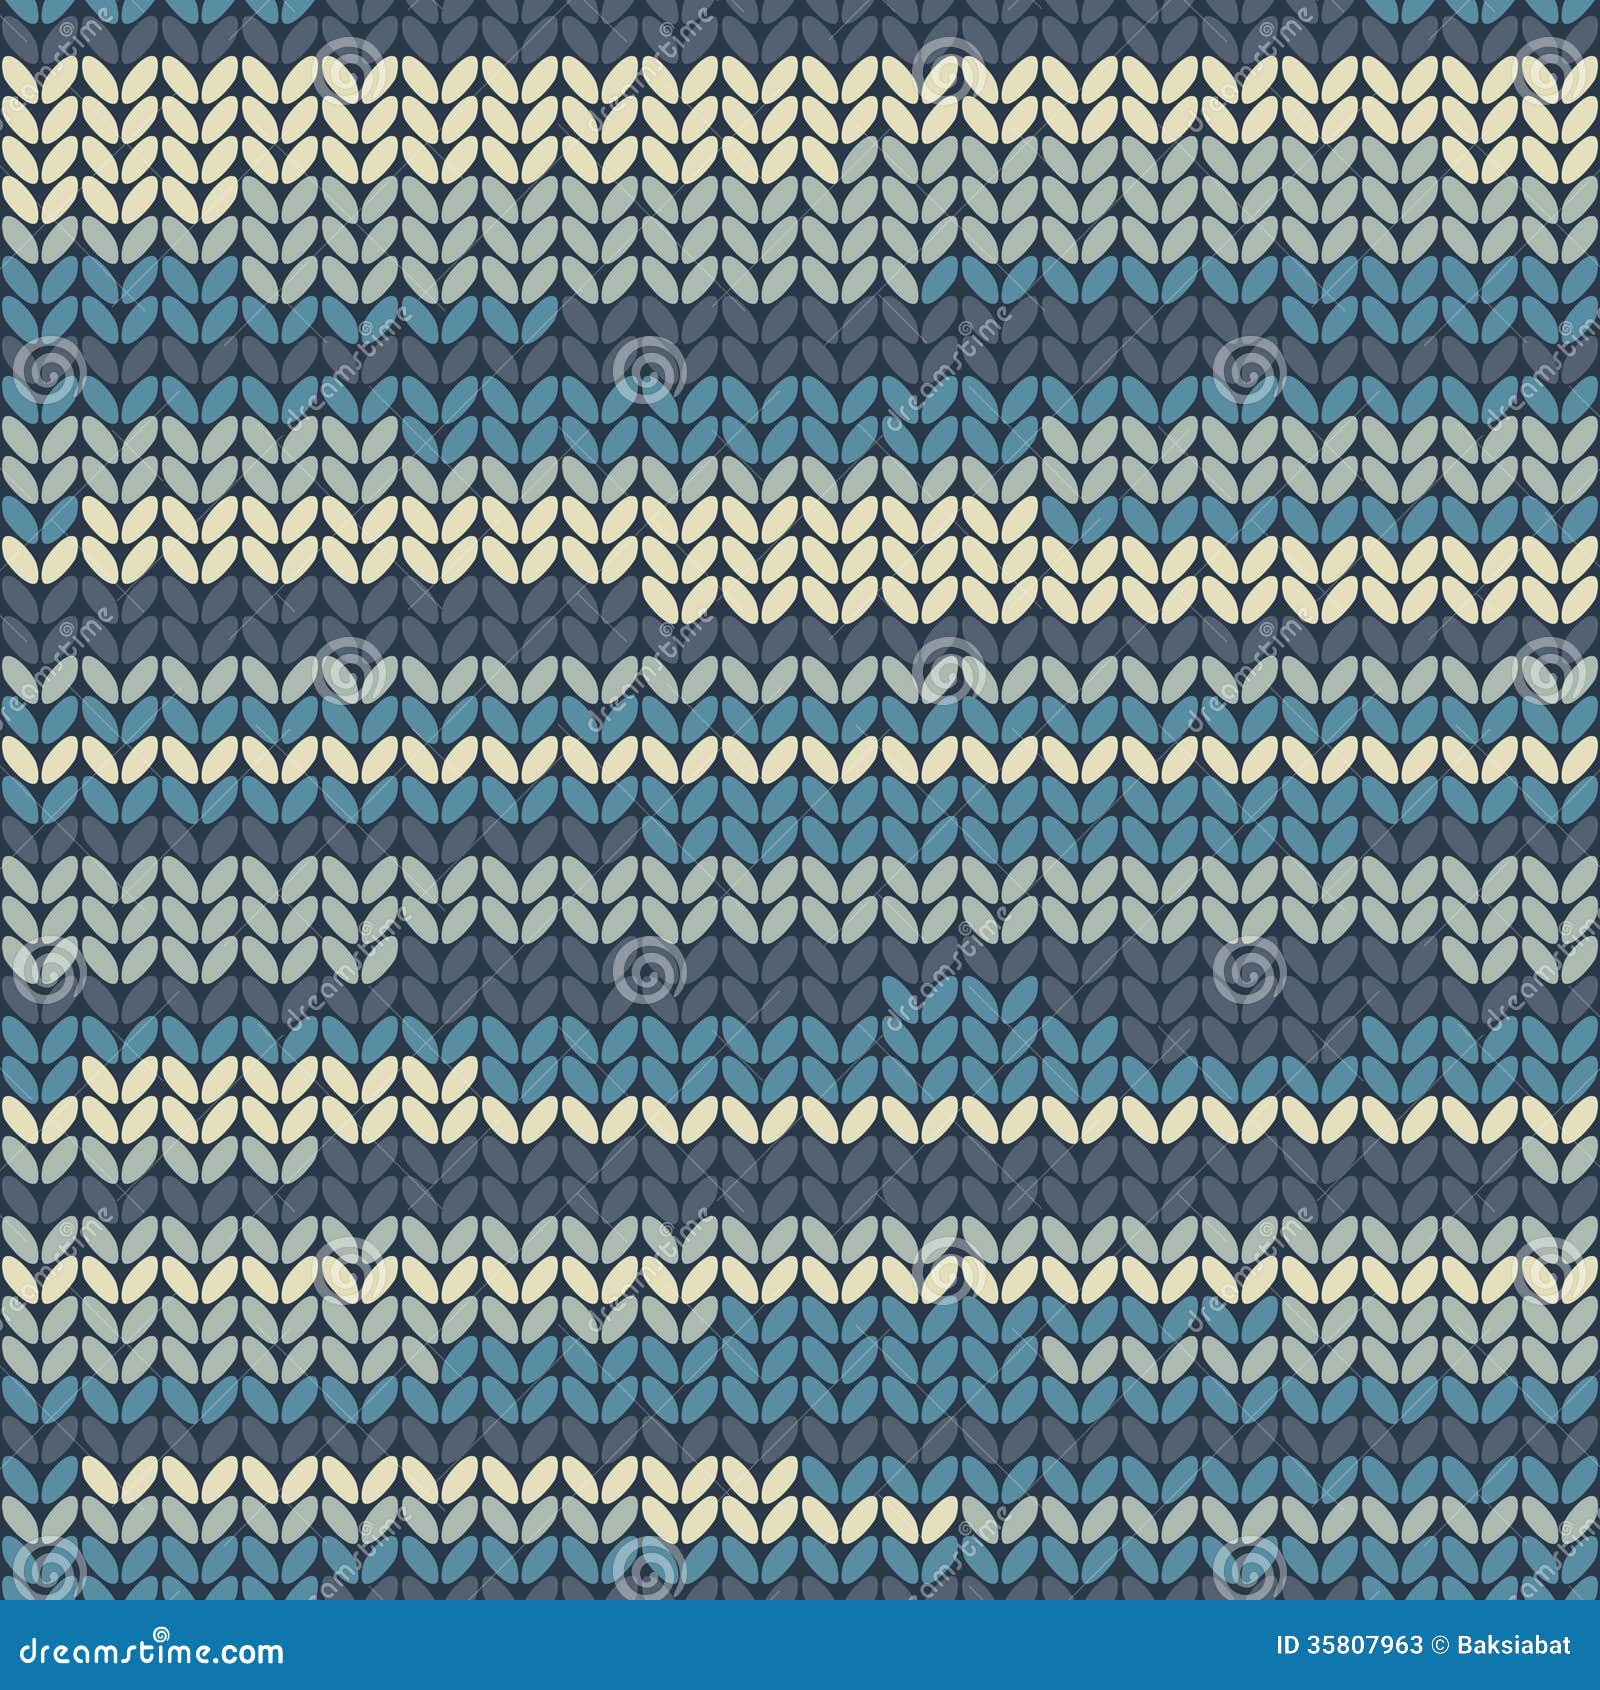 Illustration Seamless Knitted Pattern Stock Vector